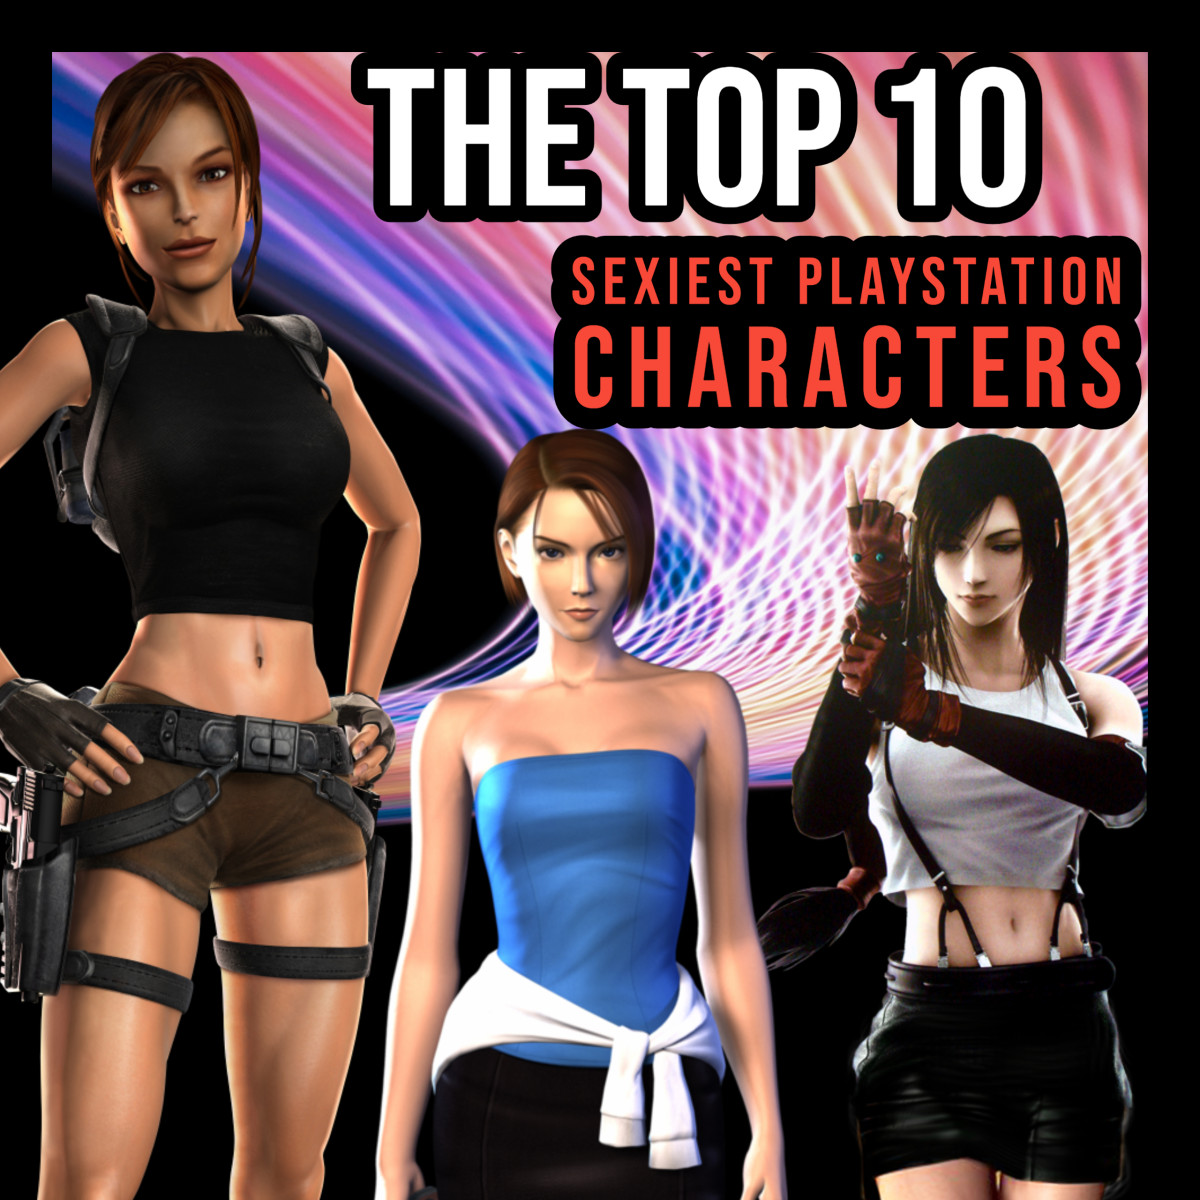 The Top 10 Sexiest PlayStation Characters